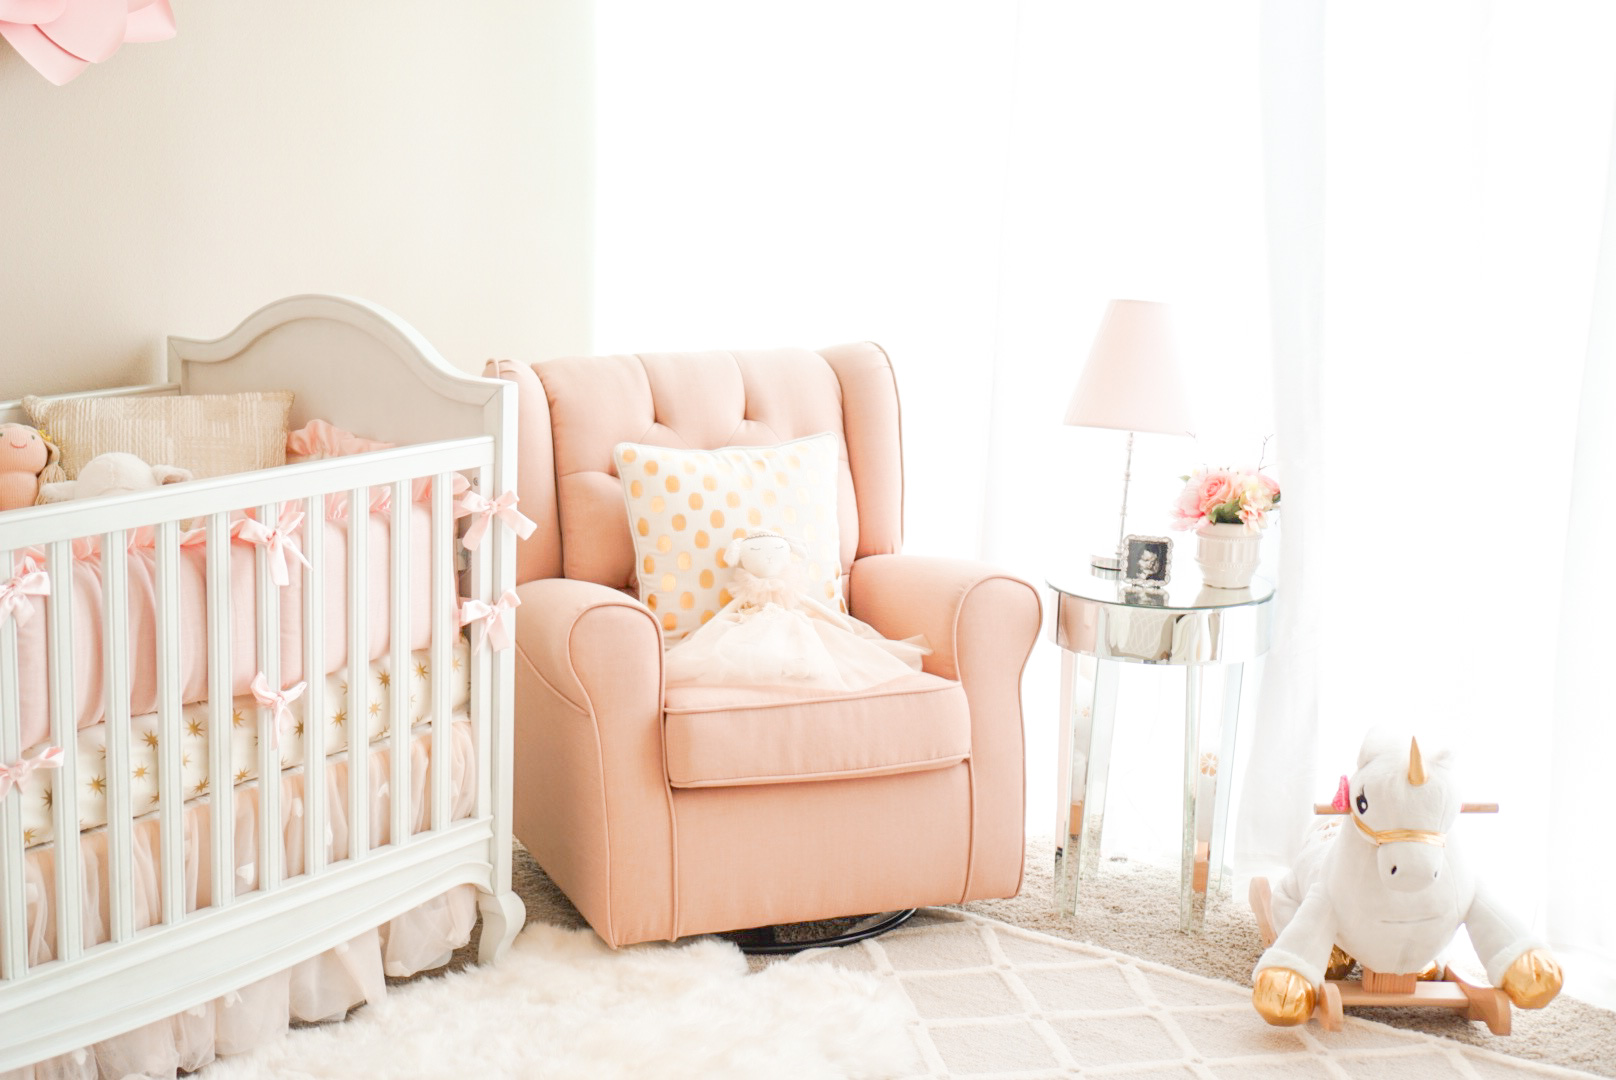 Lifestyle Blogger Katelyn Jones of A Touch of Pink shares her Baby Girl's Nursery Furniture 